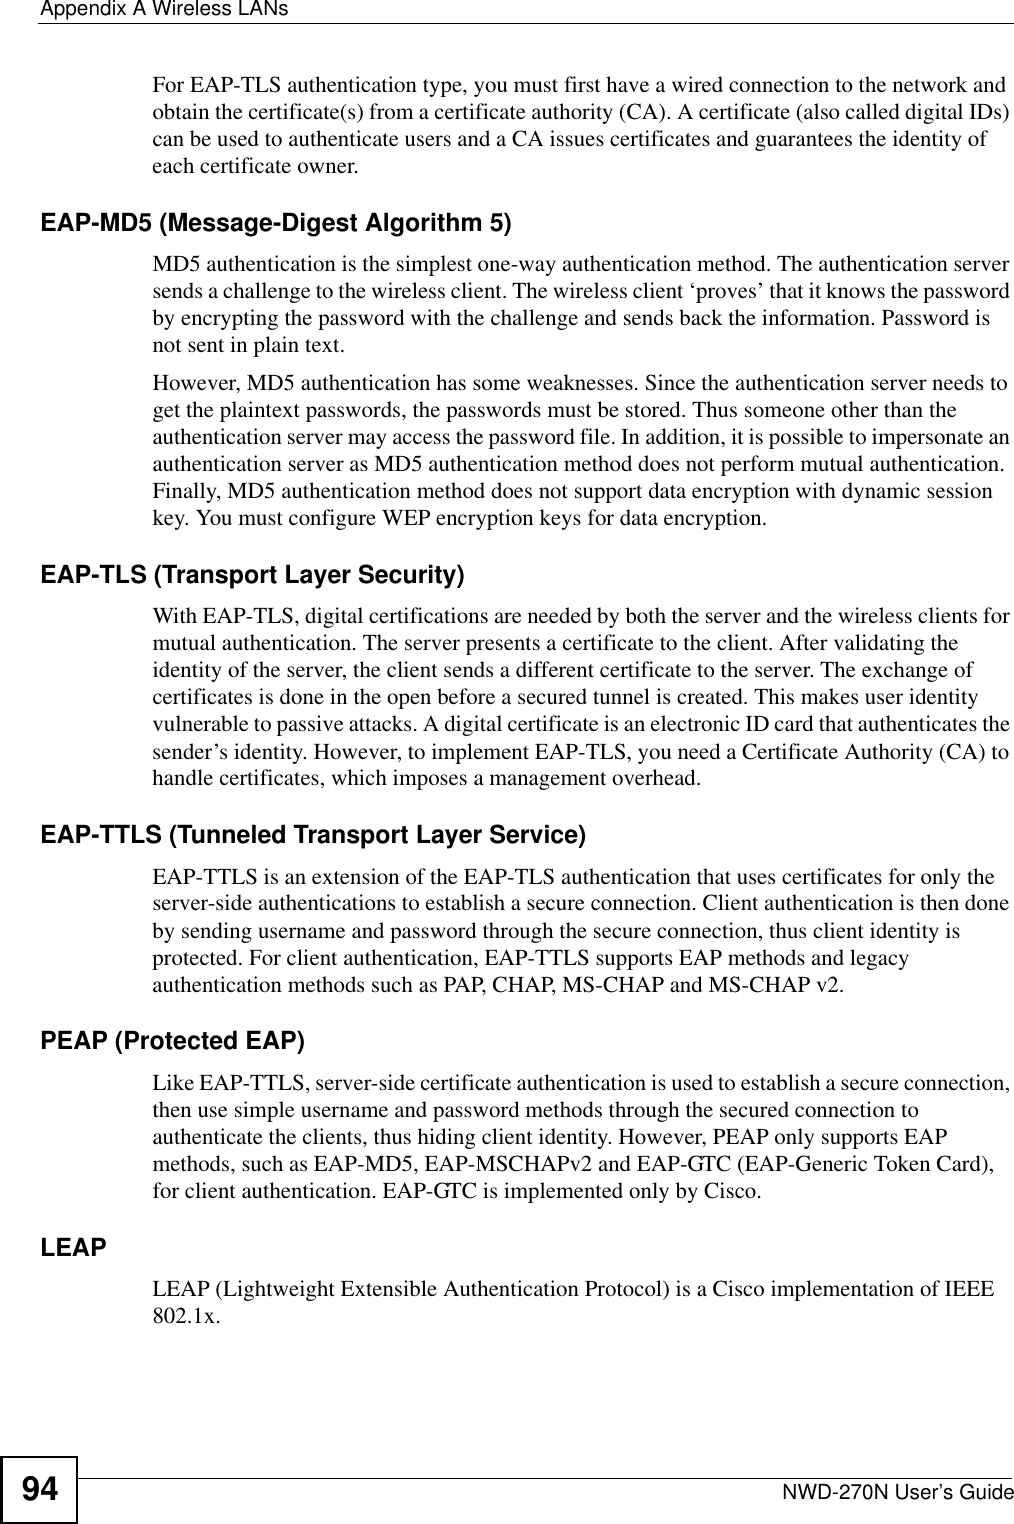 Appendix A Wireless LANsNWD-270N User’s Guide94For EAP-TLS authentication type, you must first have a wired connection to the network and obtain the certificate(s) from a certificate authority (CA). A certificate (also called digital IDs) can be used to authenticate users and a CA issues certificates and guarantees the identity of each certificate owner.EAP-MD5 (Message-Digest Algorithm 5)MD5 authentication is the simplest one-way authentication method. The authentication server sends a challenge to the wireless client. The wireless client ‘proves’ that it knows the password by encrypting the password with the challenge and sends back the information. Password is not sent in plain text. However, MD5 authentication has some weaknesses. Since the authentication server needs to get the plaintext passwords, the passwords must be stored. Thus someone other than the authentication server may access the password file. In addition, it is possible to impersonate an authentication server as MD5 authentication method does not perform mutual authentication. Finally, MD5 authentication method does not support data encryption with dynamic session key. You must configure WEP encryption keys for data encryption. EAP-TLS (Transport Layer Security)With EAP-TLS, digital certifications are needed by both the server and the wireless clients for mutual authentication. The server presents a certificate to the client. After validating the identity of the server, the client sends a different certificate to the server. The exchange of certificates is done in the open before a secured tunnel is created. This makes user identity vulnerable to passive attacks. A digital certificate is an electronic ID card that authenticates the sender’s identity. However, to implement EAP-TLS, you need a Certificate Authority (CA) to handle certificates, which imposes a management overhead. EAP-TTLS (Tunneled Transport Layer Service) EAP-TTLS is an extension of the EAP-TLS authentication that uses certificates for only the server-side authentications to establish a secure connection. Client authentication is then done by sending username and password through the secure connection, thus client identity is protected. For client authentication, EAP-TTLS supports EAP methods and legacy authentication methods such as PAP, CHAP, MS-CHAP and MS-CHAP v2. PEAP (Protected EAP)   Like EAP-TTLS, server-side certificate authentication is used to establish a secure connection, then use simple username and password methods through the secured connection to authenticate the clients, thus hiding client identity. However, PEAP only supports EAP methods, such as EAP-MD5, EAP-MSCHAPv2 and EAP-GTC (EAP-Generic Token Card), for client authentication. EAP-GTC is implemented only by Cisco.LEAPLEAP (Lightweight Extensible Authentication Protocol) is a Cisco implementation of IEEE 802.1x. 